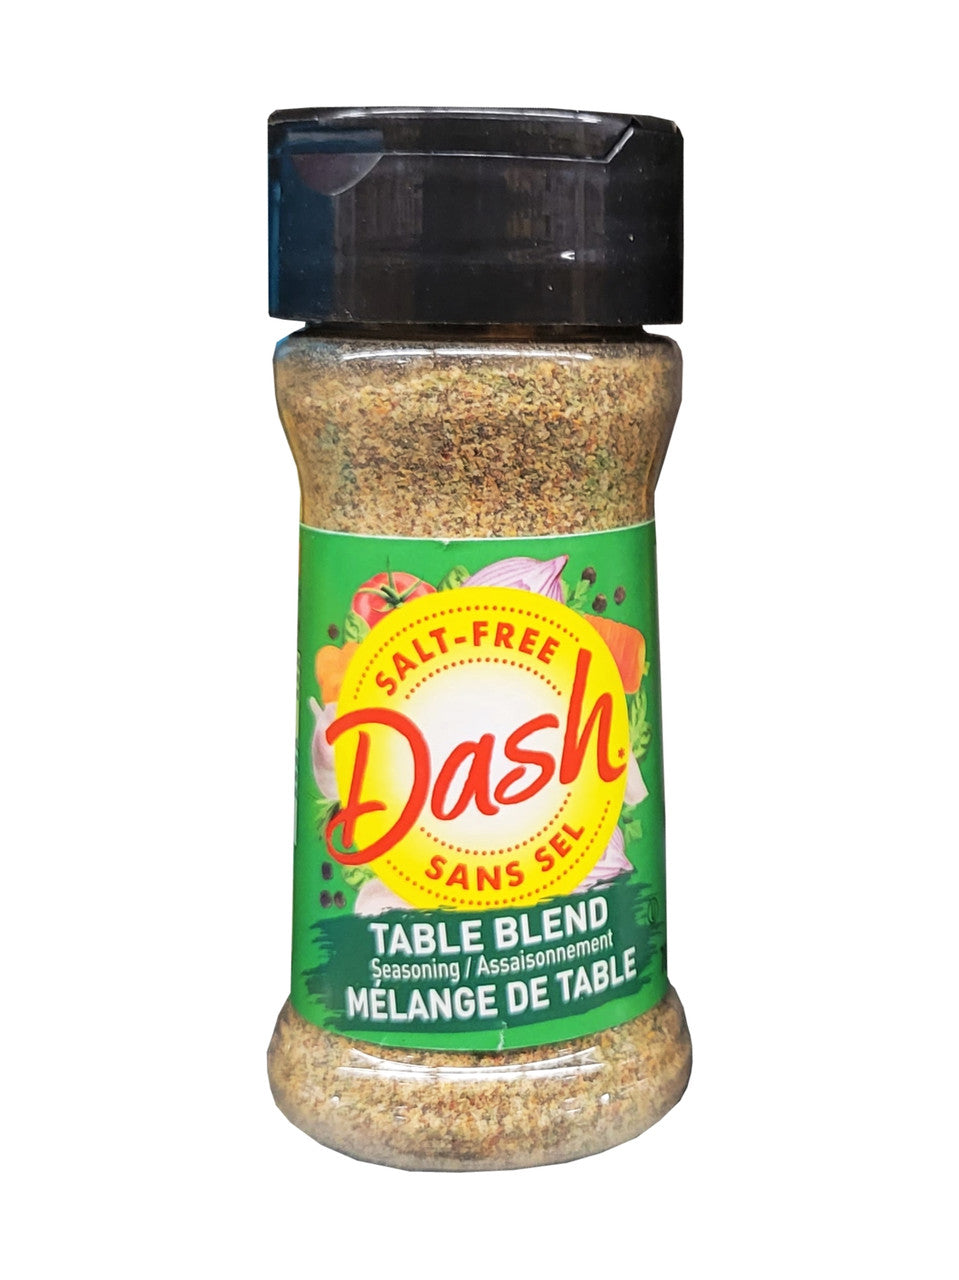 Dash Salt-Free Table Blend Seasoning, 70g/2.4 oz., Bottle {Imported from Canada}